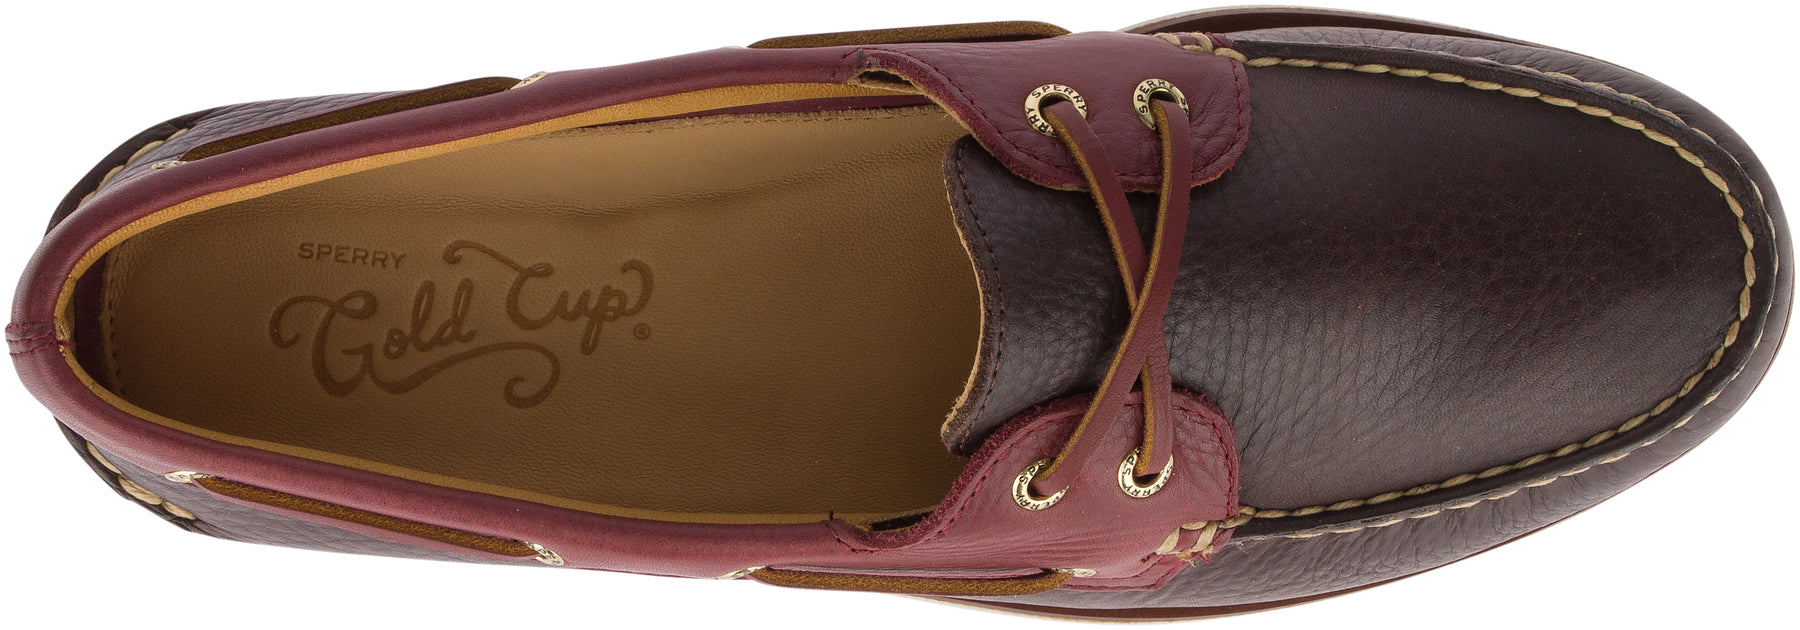 Men's Gold Cup Authentic Original French Roast Boat Shoe (STS19669)